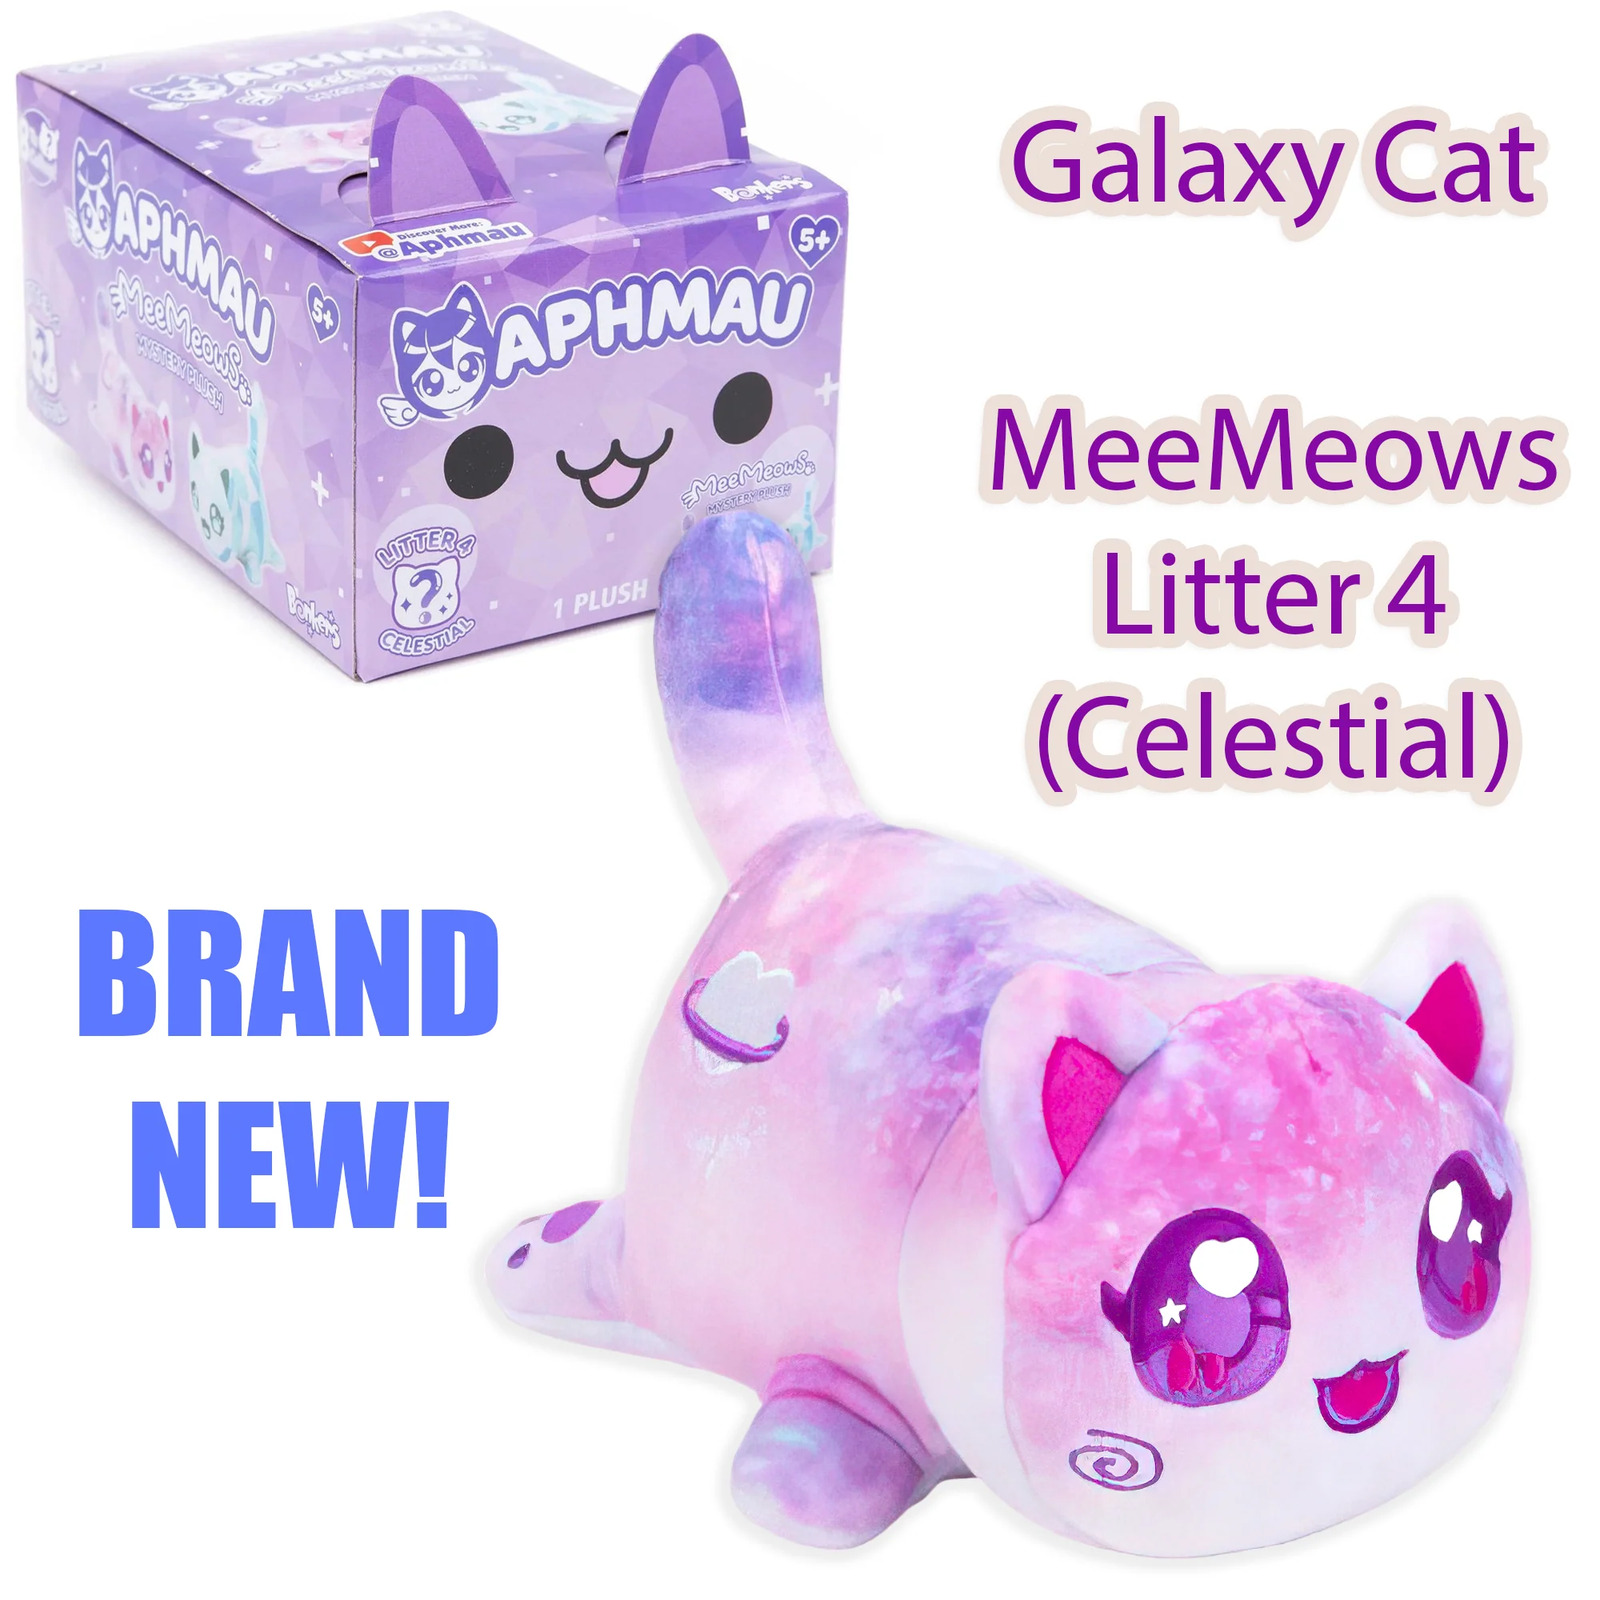 GALAXY CAT - MeeMeows Litter 4 from Aphmau (BRAND NEW) Cute Kitty Plushie